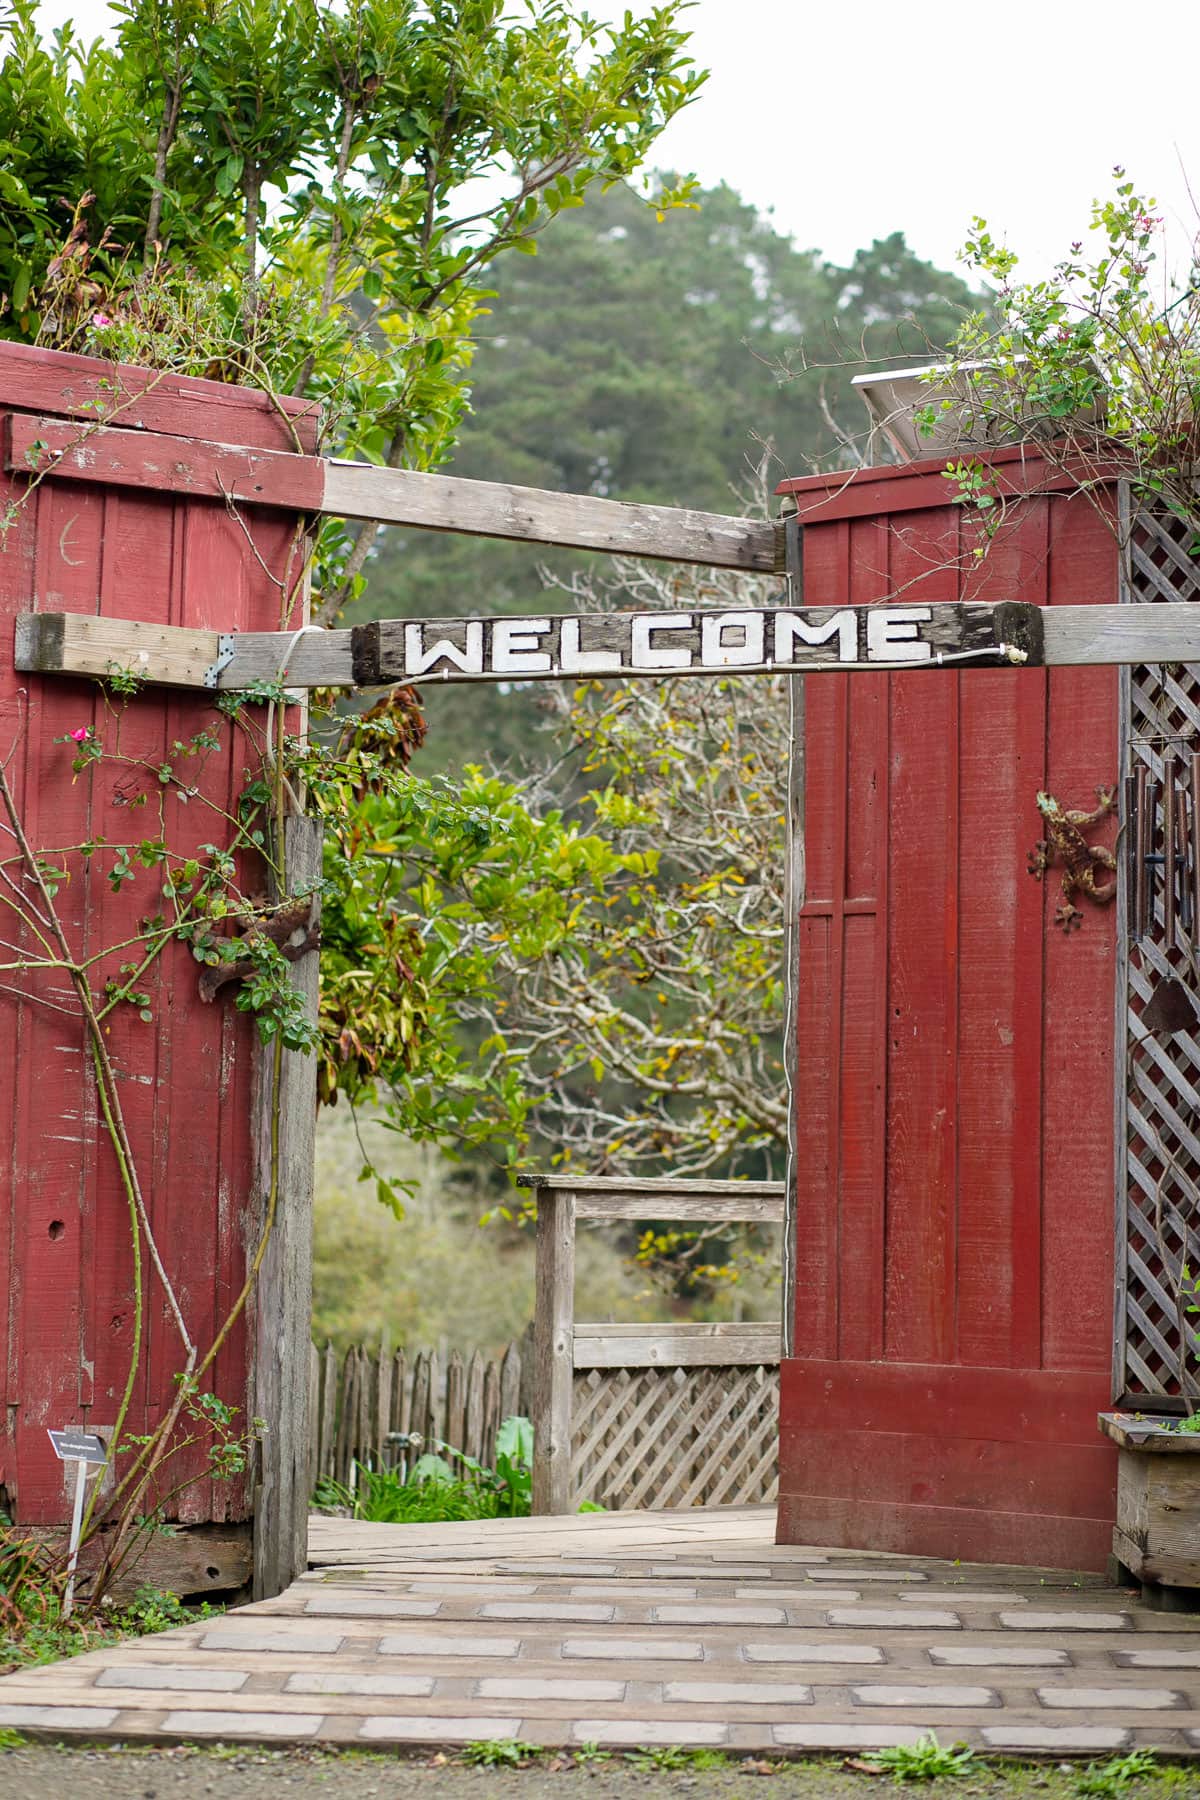 Gate with Welcome posted above it